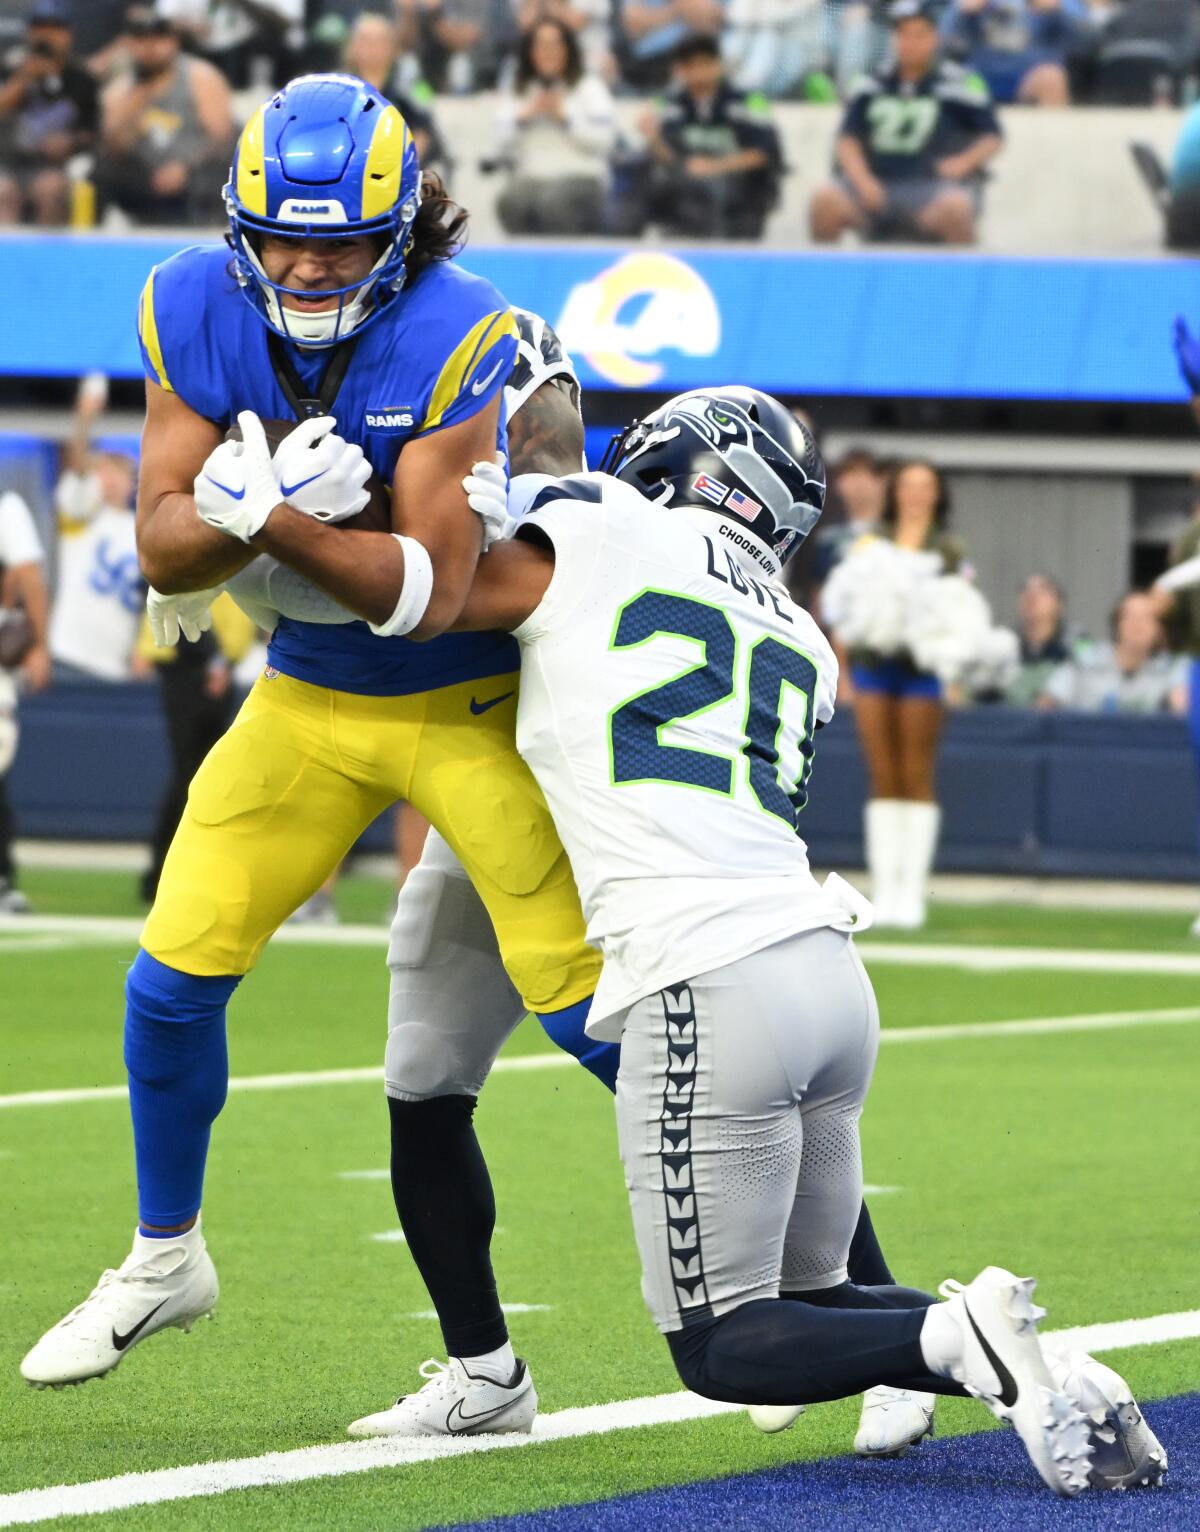 The Seahawks' Julian Love can't stop the Rams' Puka Nacua from scoring a touchdown.